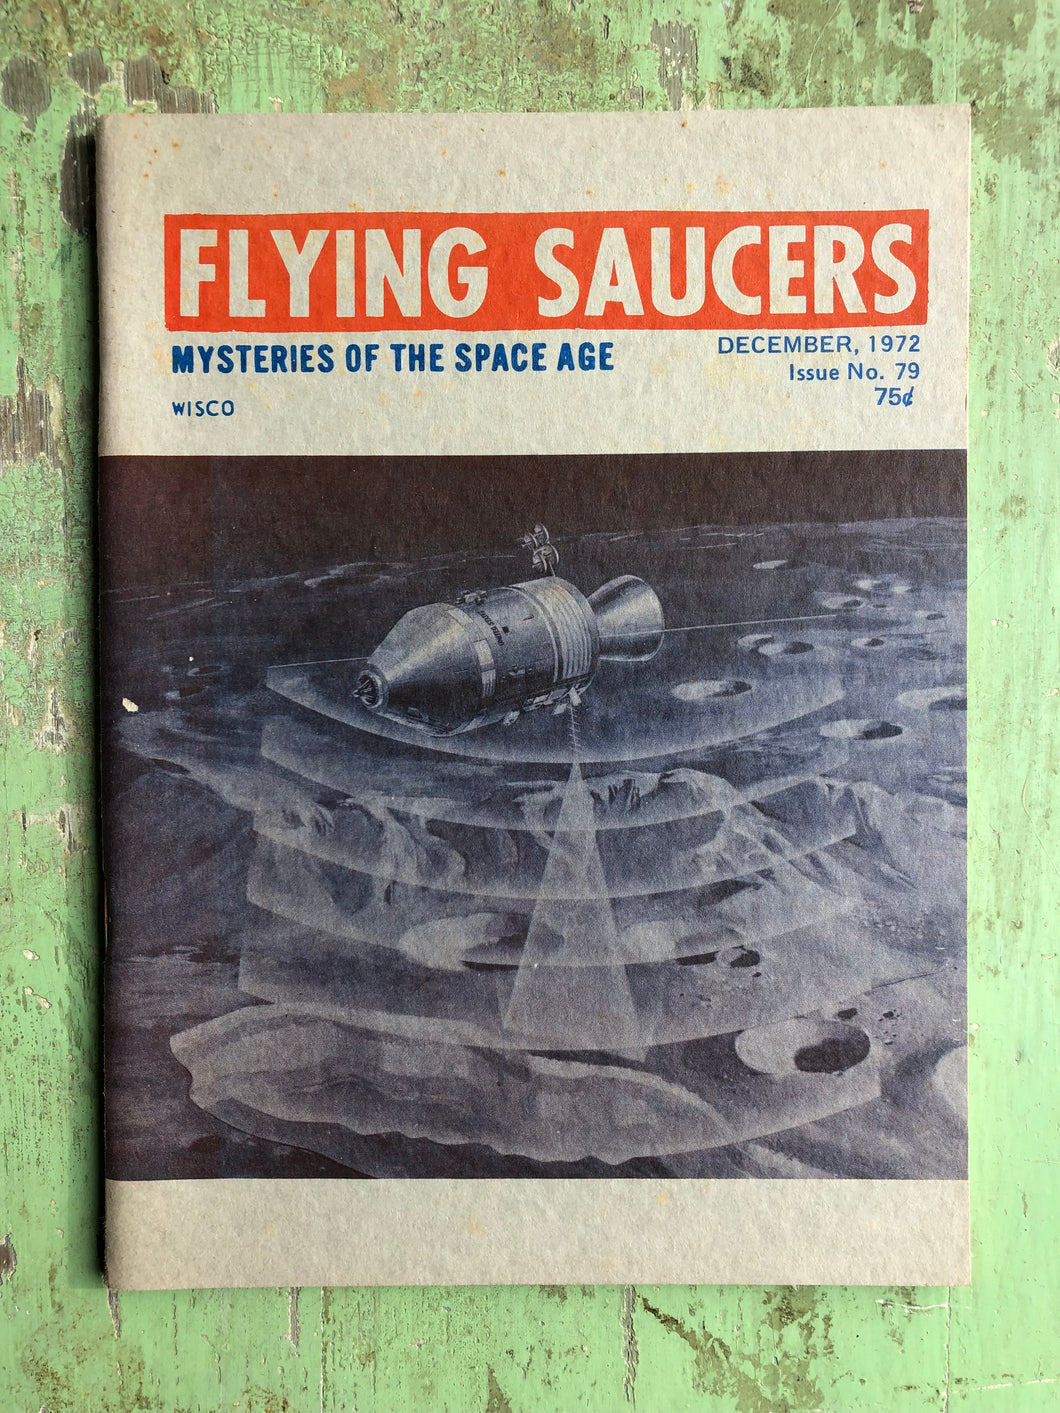 Flying Saucers: Mysteries of the Space Age. December, 1972. Issue No. 79